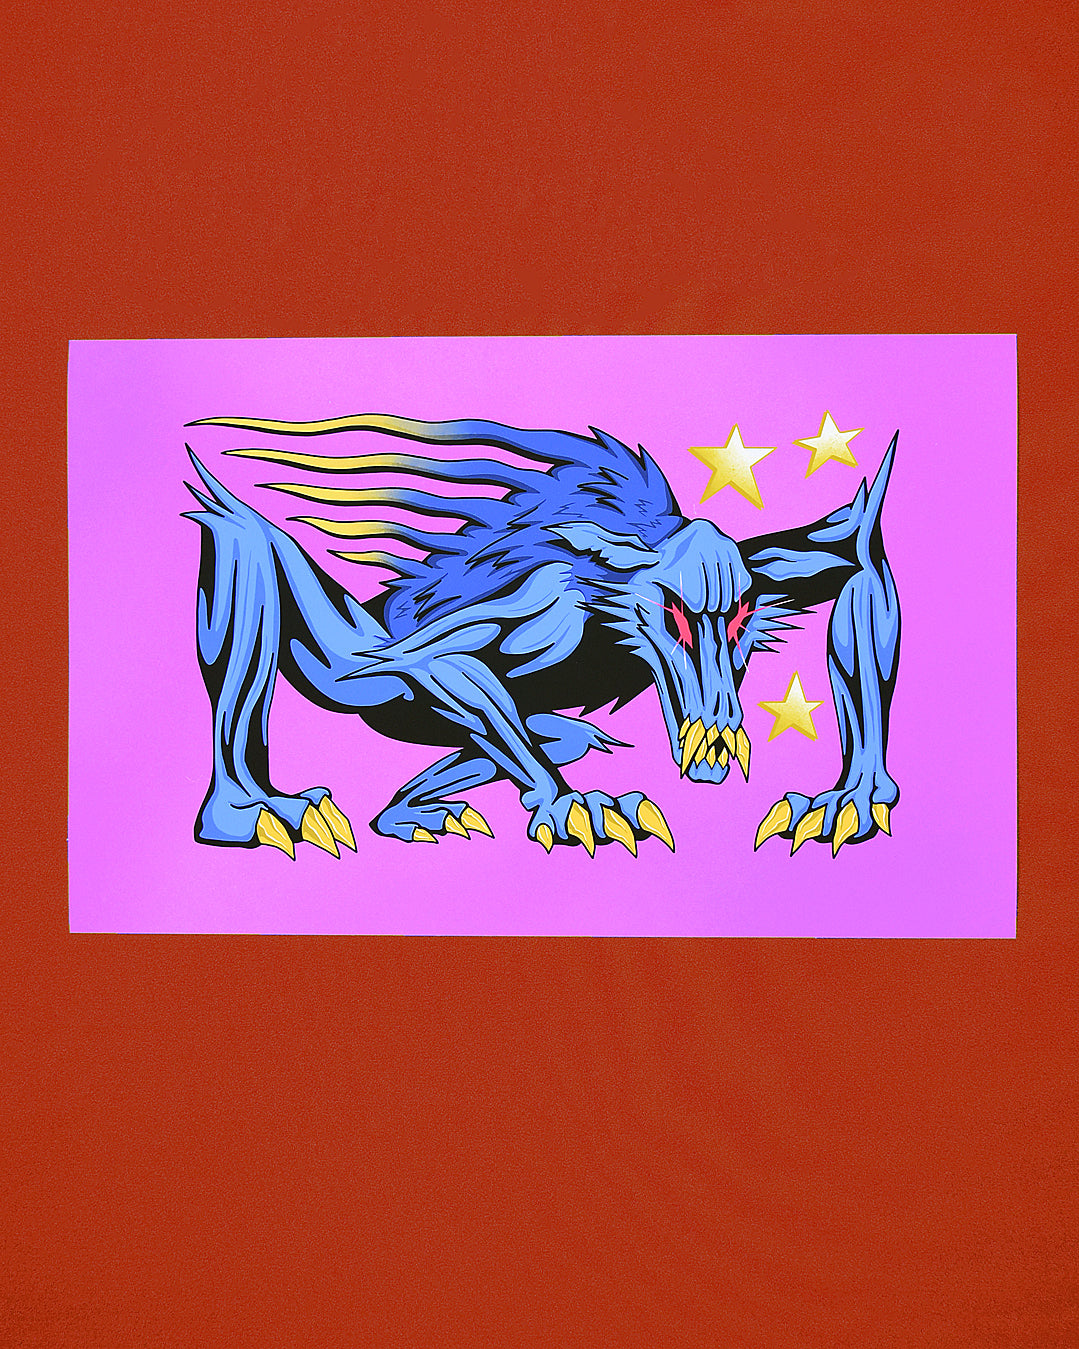 A giclee print of a blue creature with gold fangs and claws with red eyes.  The creature is down on all four legs like a human dog.  The background is purple.  3 gold stars are also in the background.  Original art of the Ravenous Chupacabra creature from Hasbro's Magic the Gathering. 